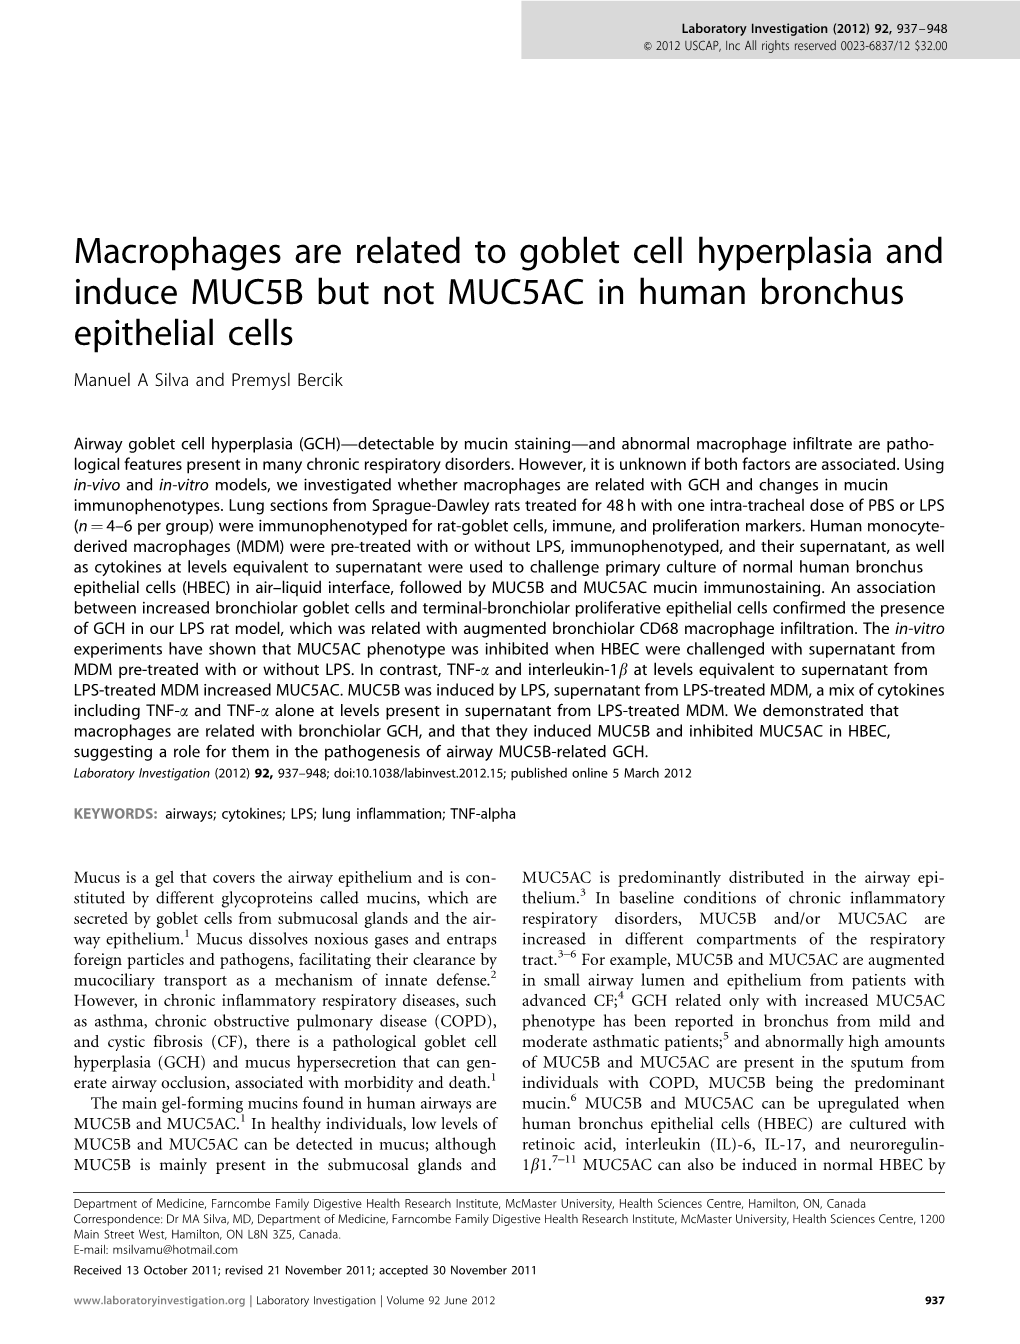 Macrophages Are Related to Goblet Cell Hyperplasia and Induce MUC5B but Not MUC5AC in Human Bronchus Epithelial Cells Manuel a Silva and Premysl Bercik